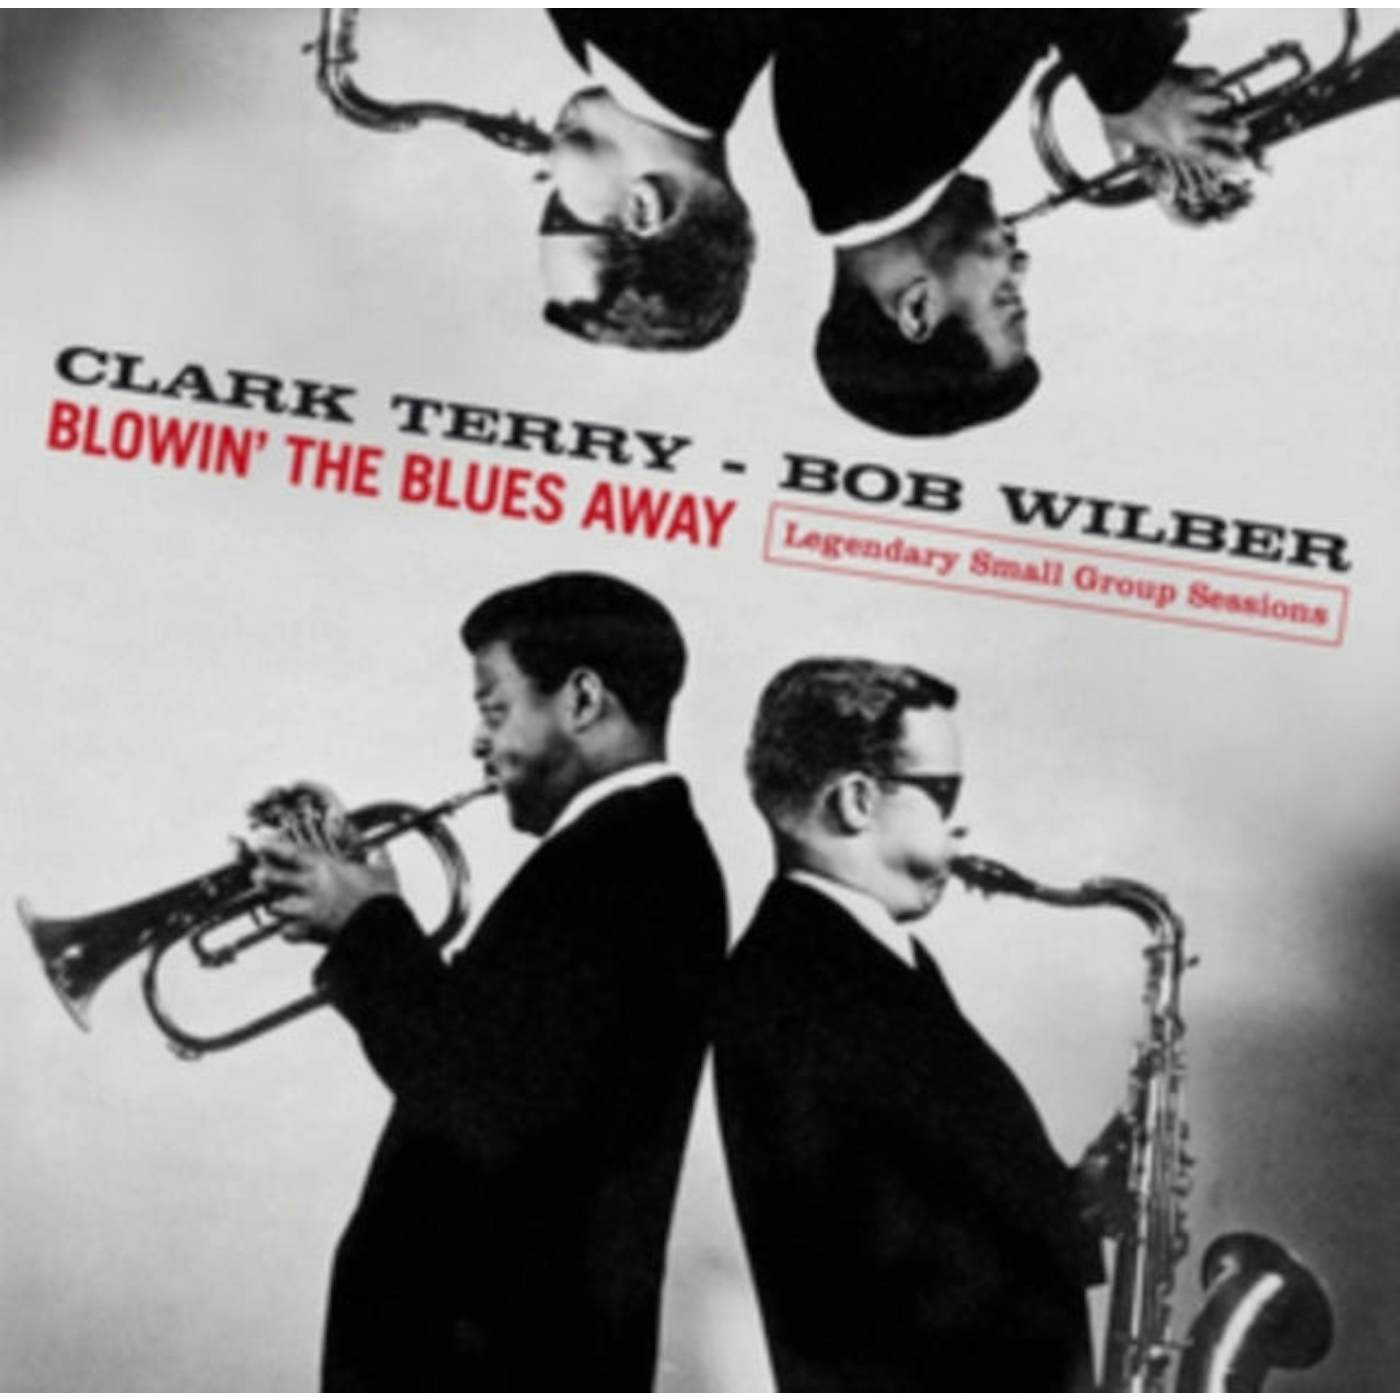 Clark Terry CD - Blowin' The Blues Away - Legendary Small Group Sessions